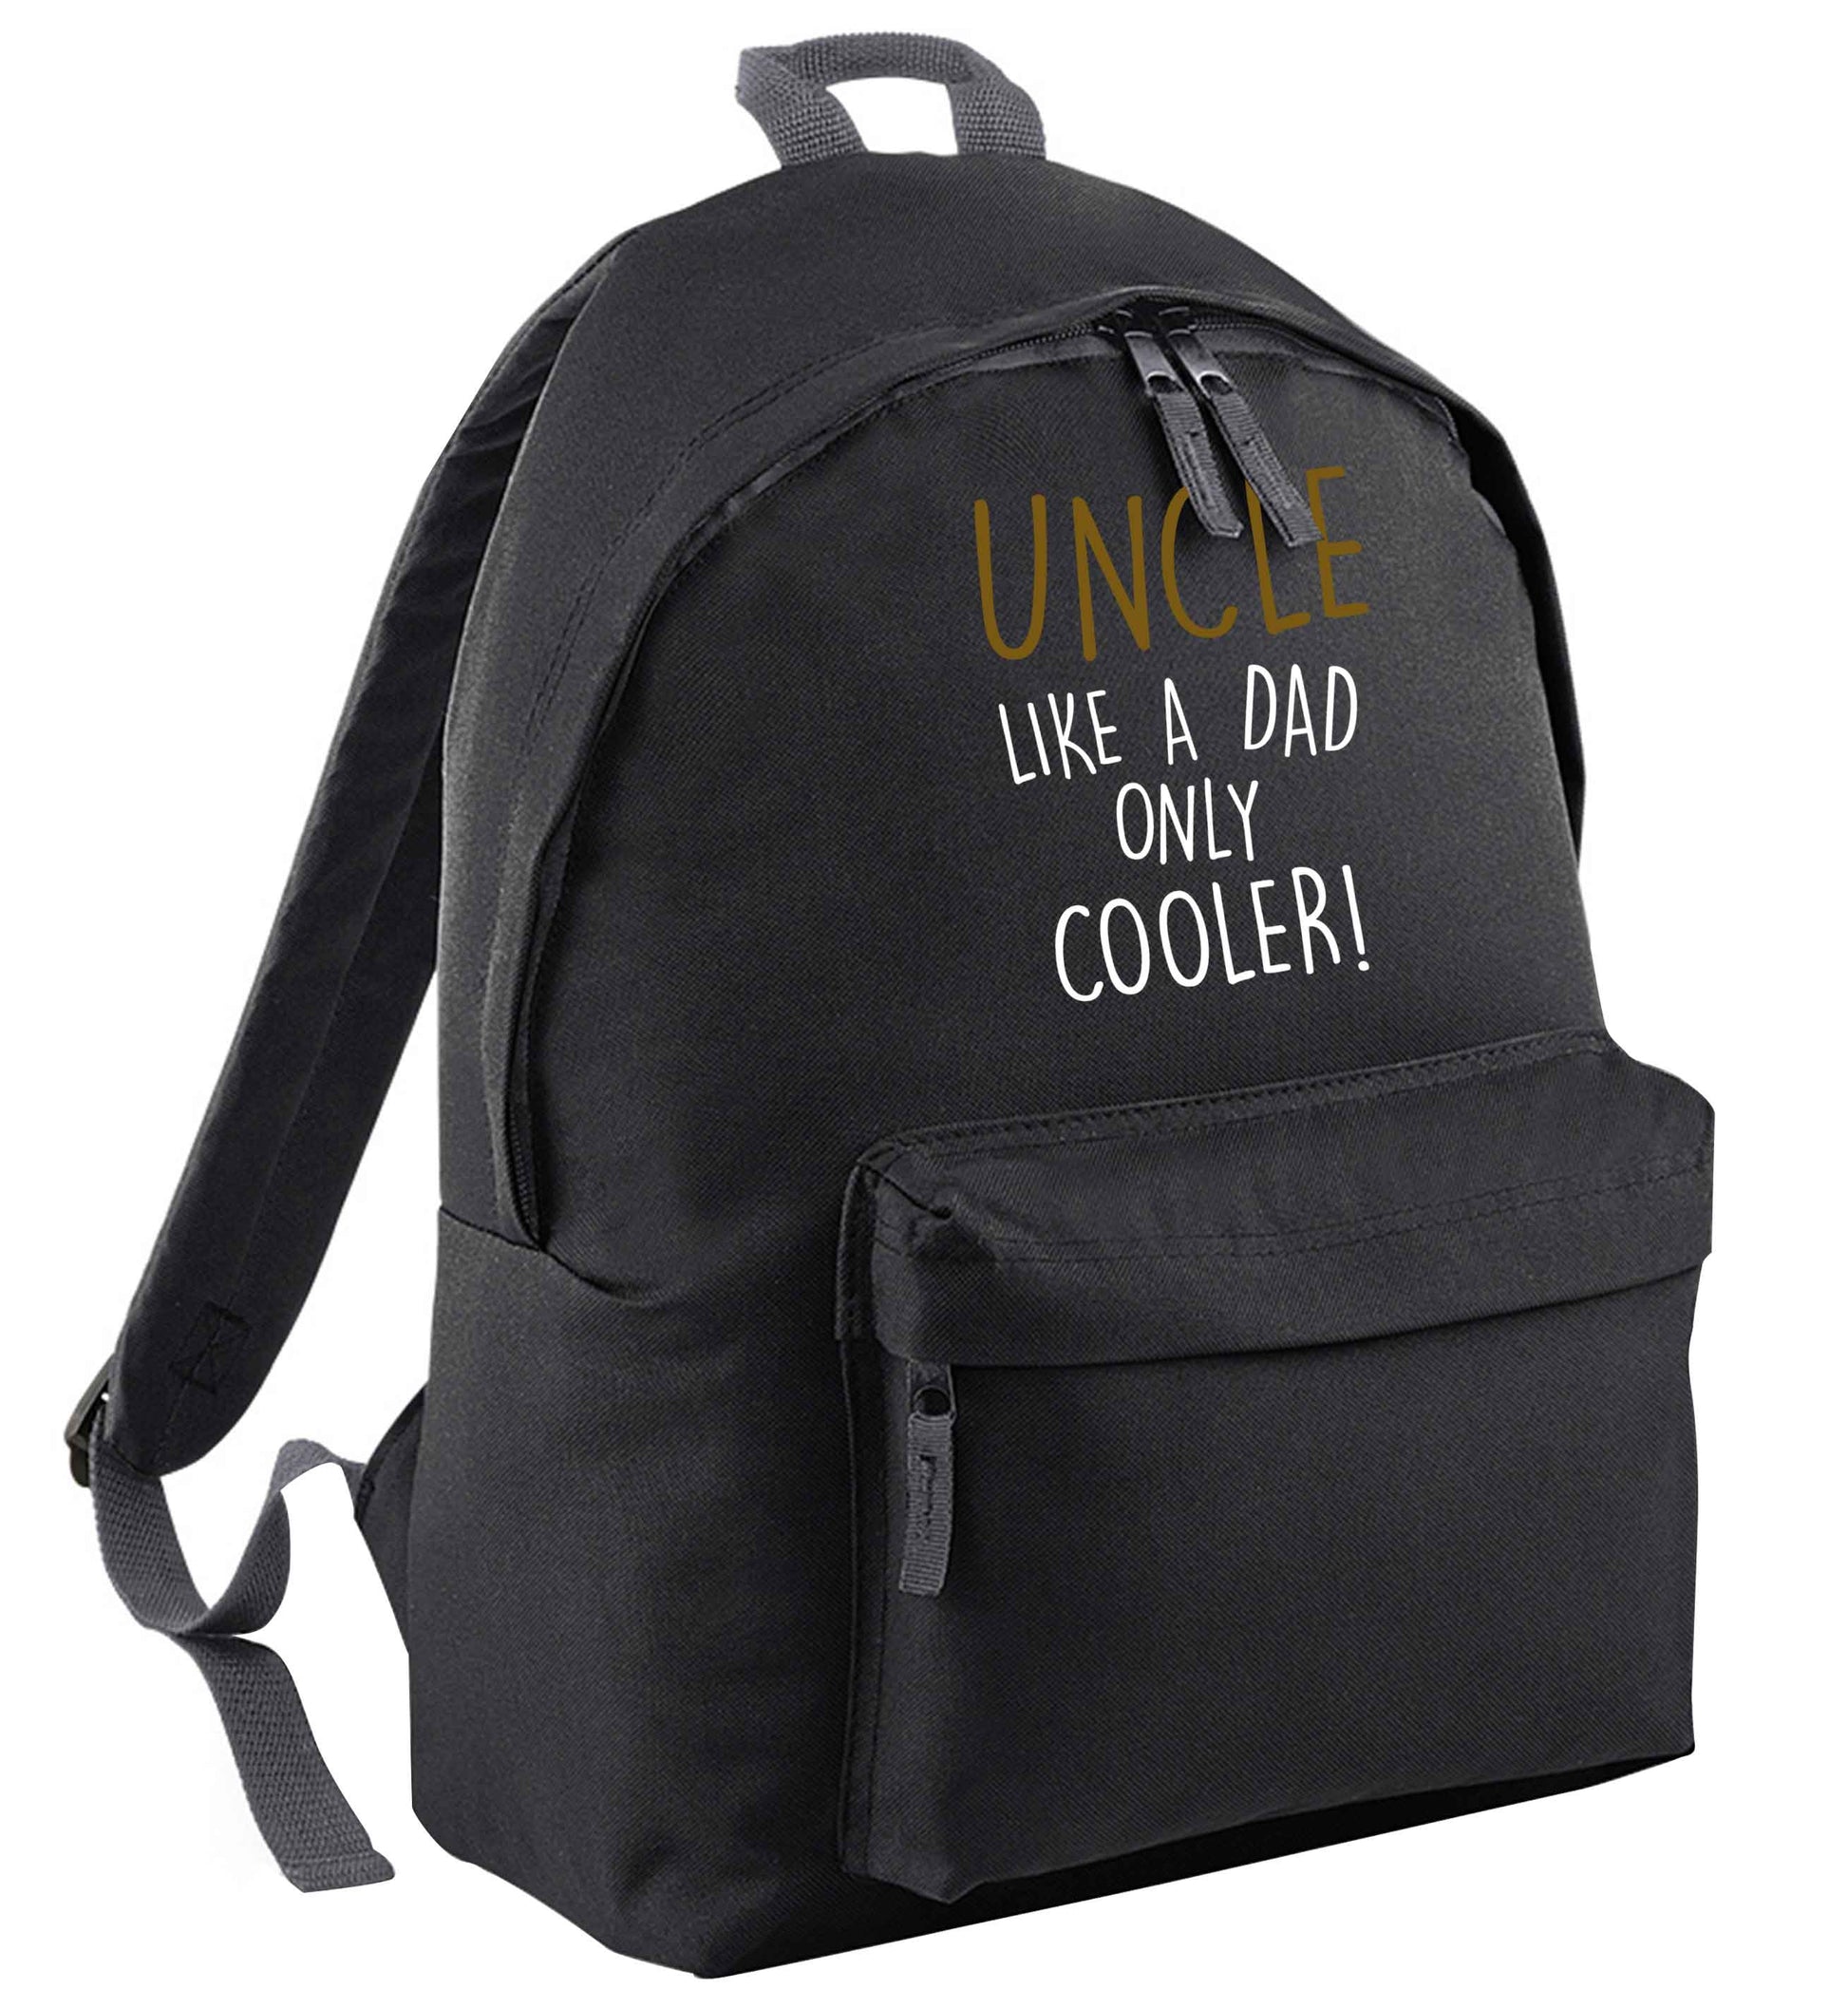 Uncle like a dad only cooler black adults backpack